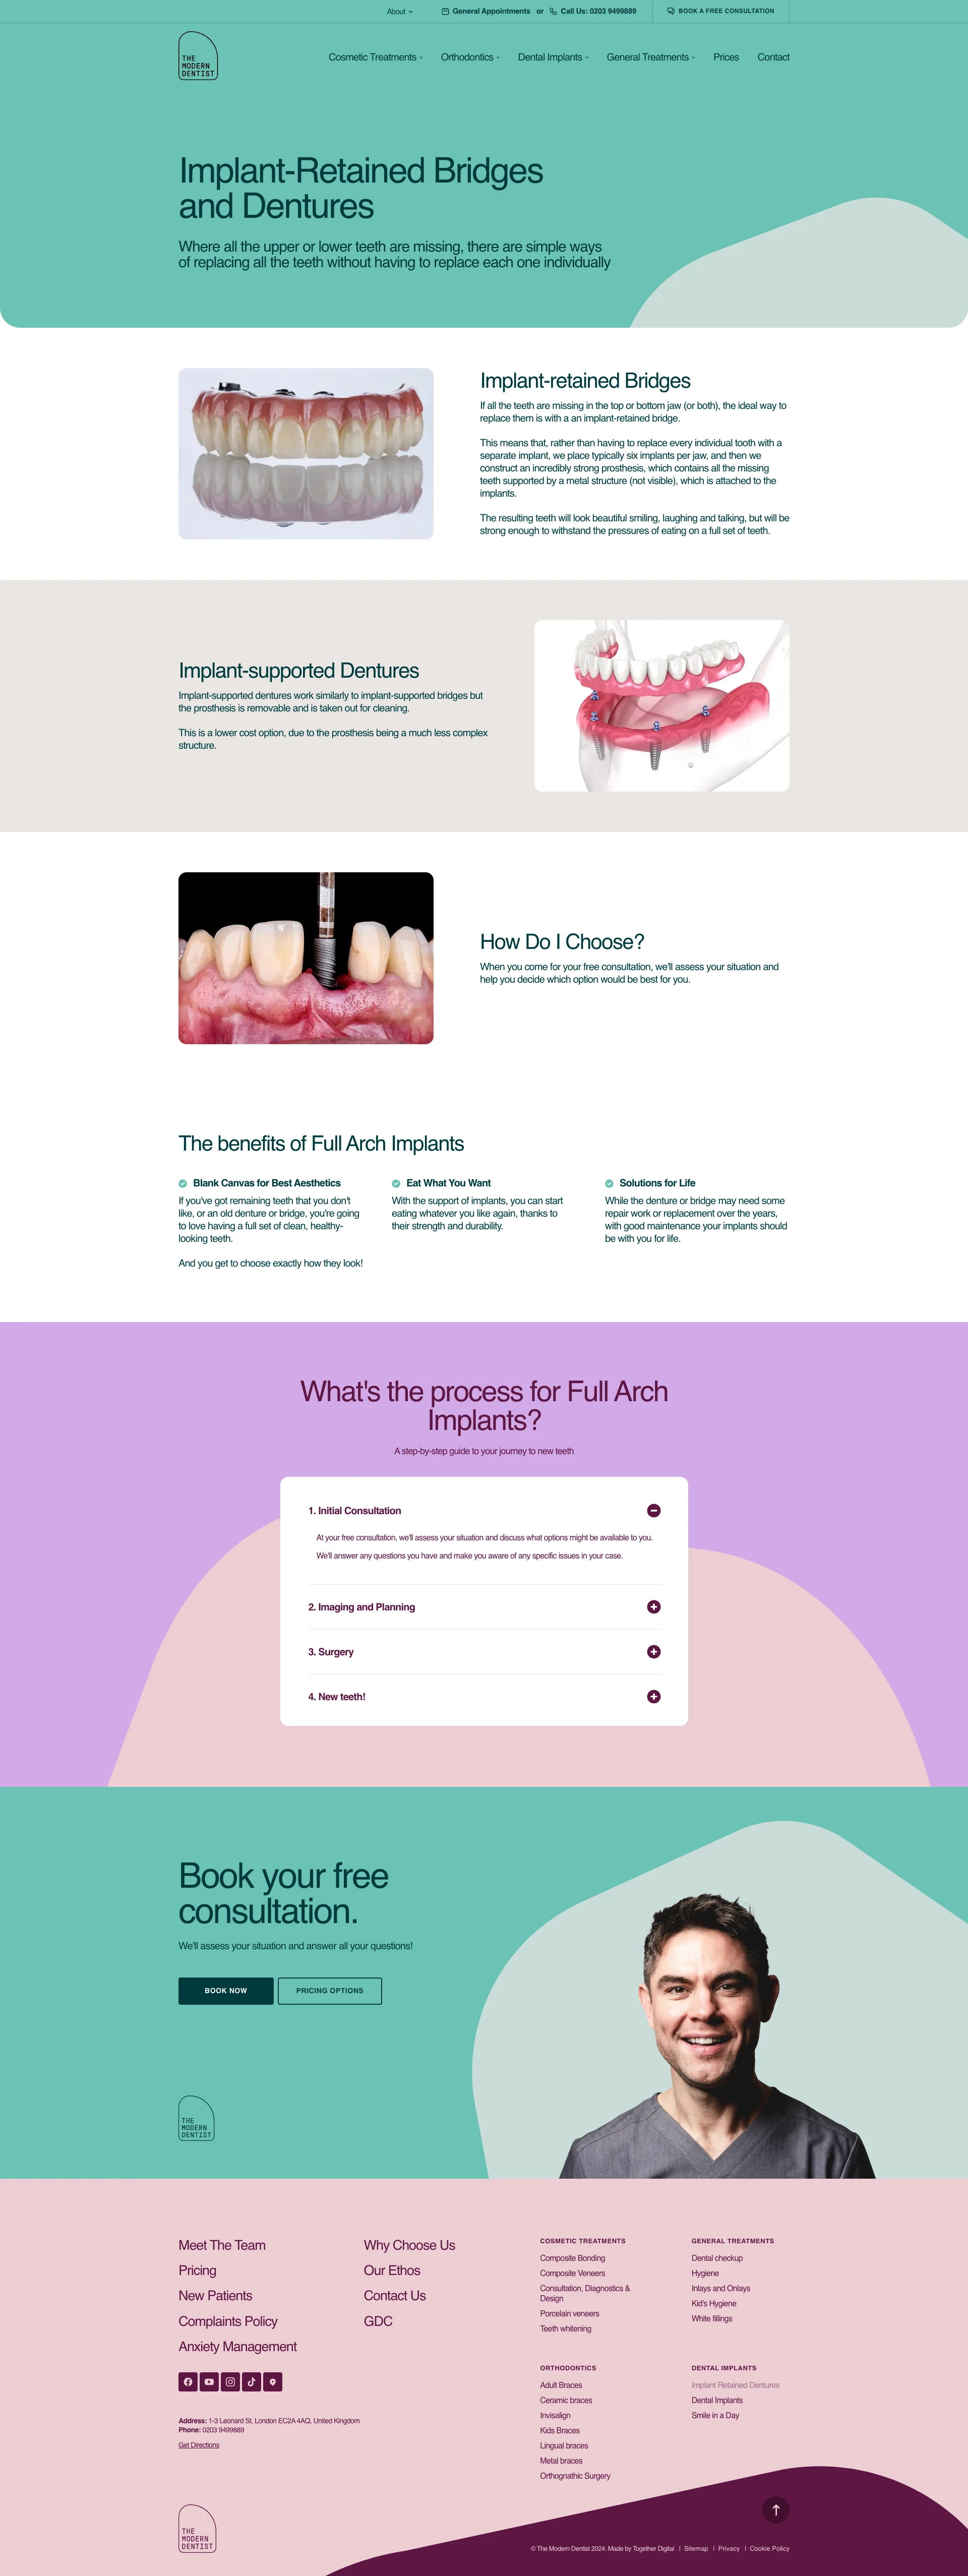 The Modern Dentist Landing Page Example: We love your teeth. That’s why we use non-invasive methods and state-of-the-art materials to bring out their natural beauty, and give you another reason to smile.